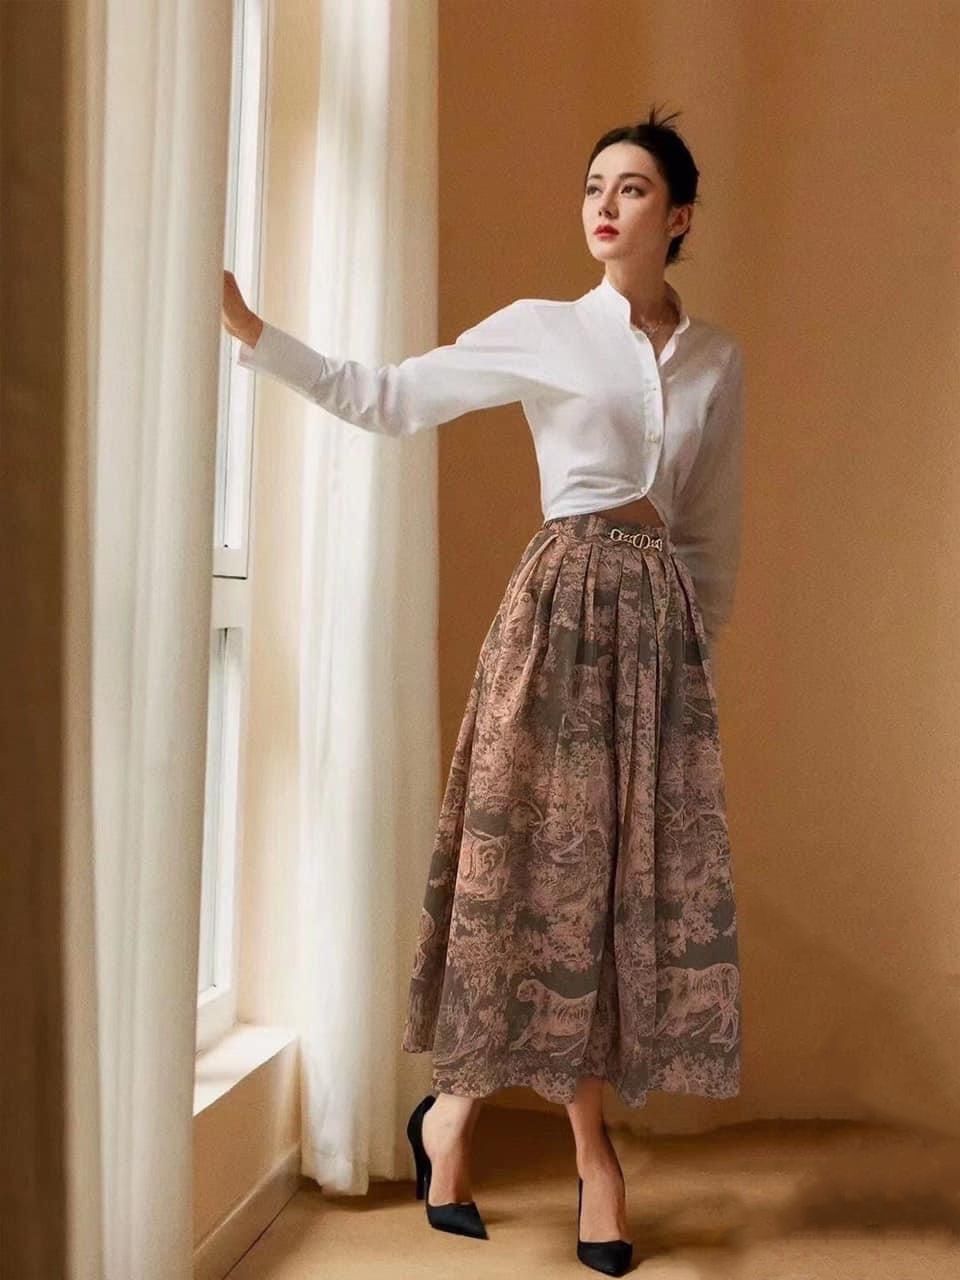 VÁY NỮ DÀI DIORIVIERA FLARED SKIRT GRAY AND PINK COTTON MUSLIN WITH TOILE DE JOUY REVERSE MOTIF 2